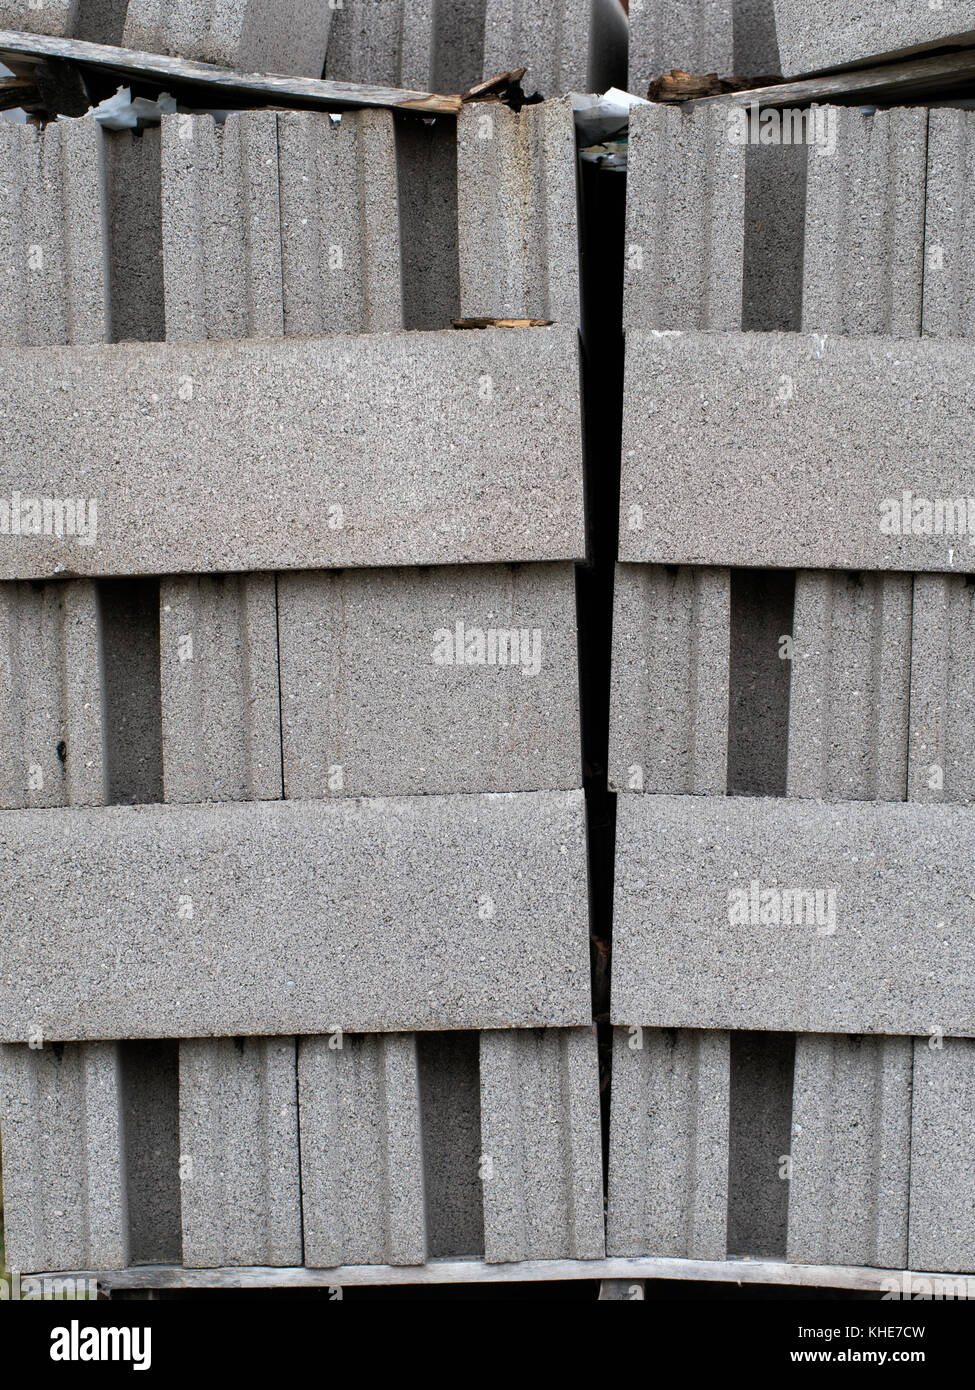 Cement blocks, breeze blocks, stacked. Building material, leaning precariously. Stock Photo